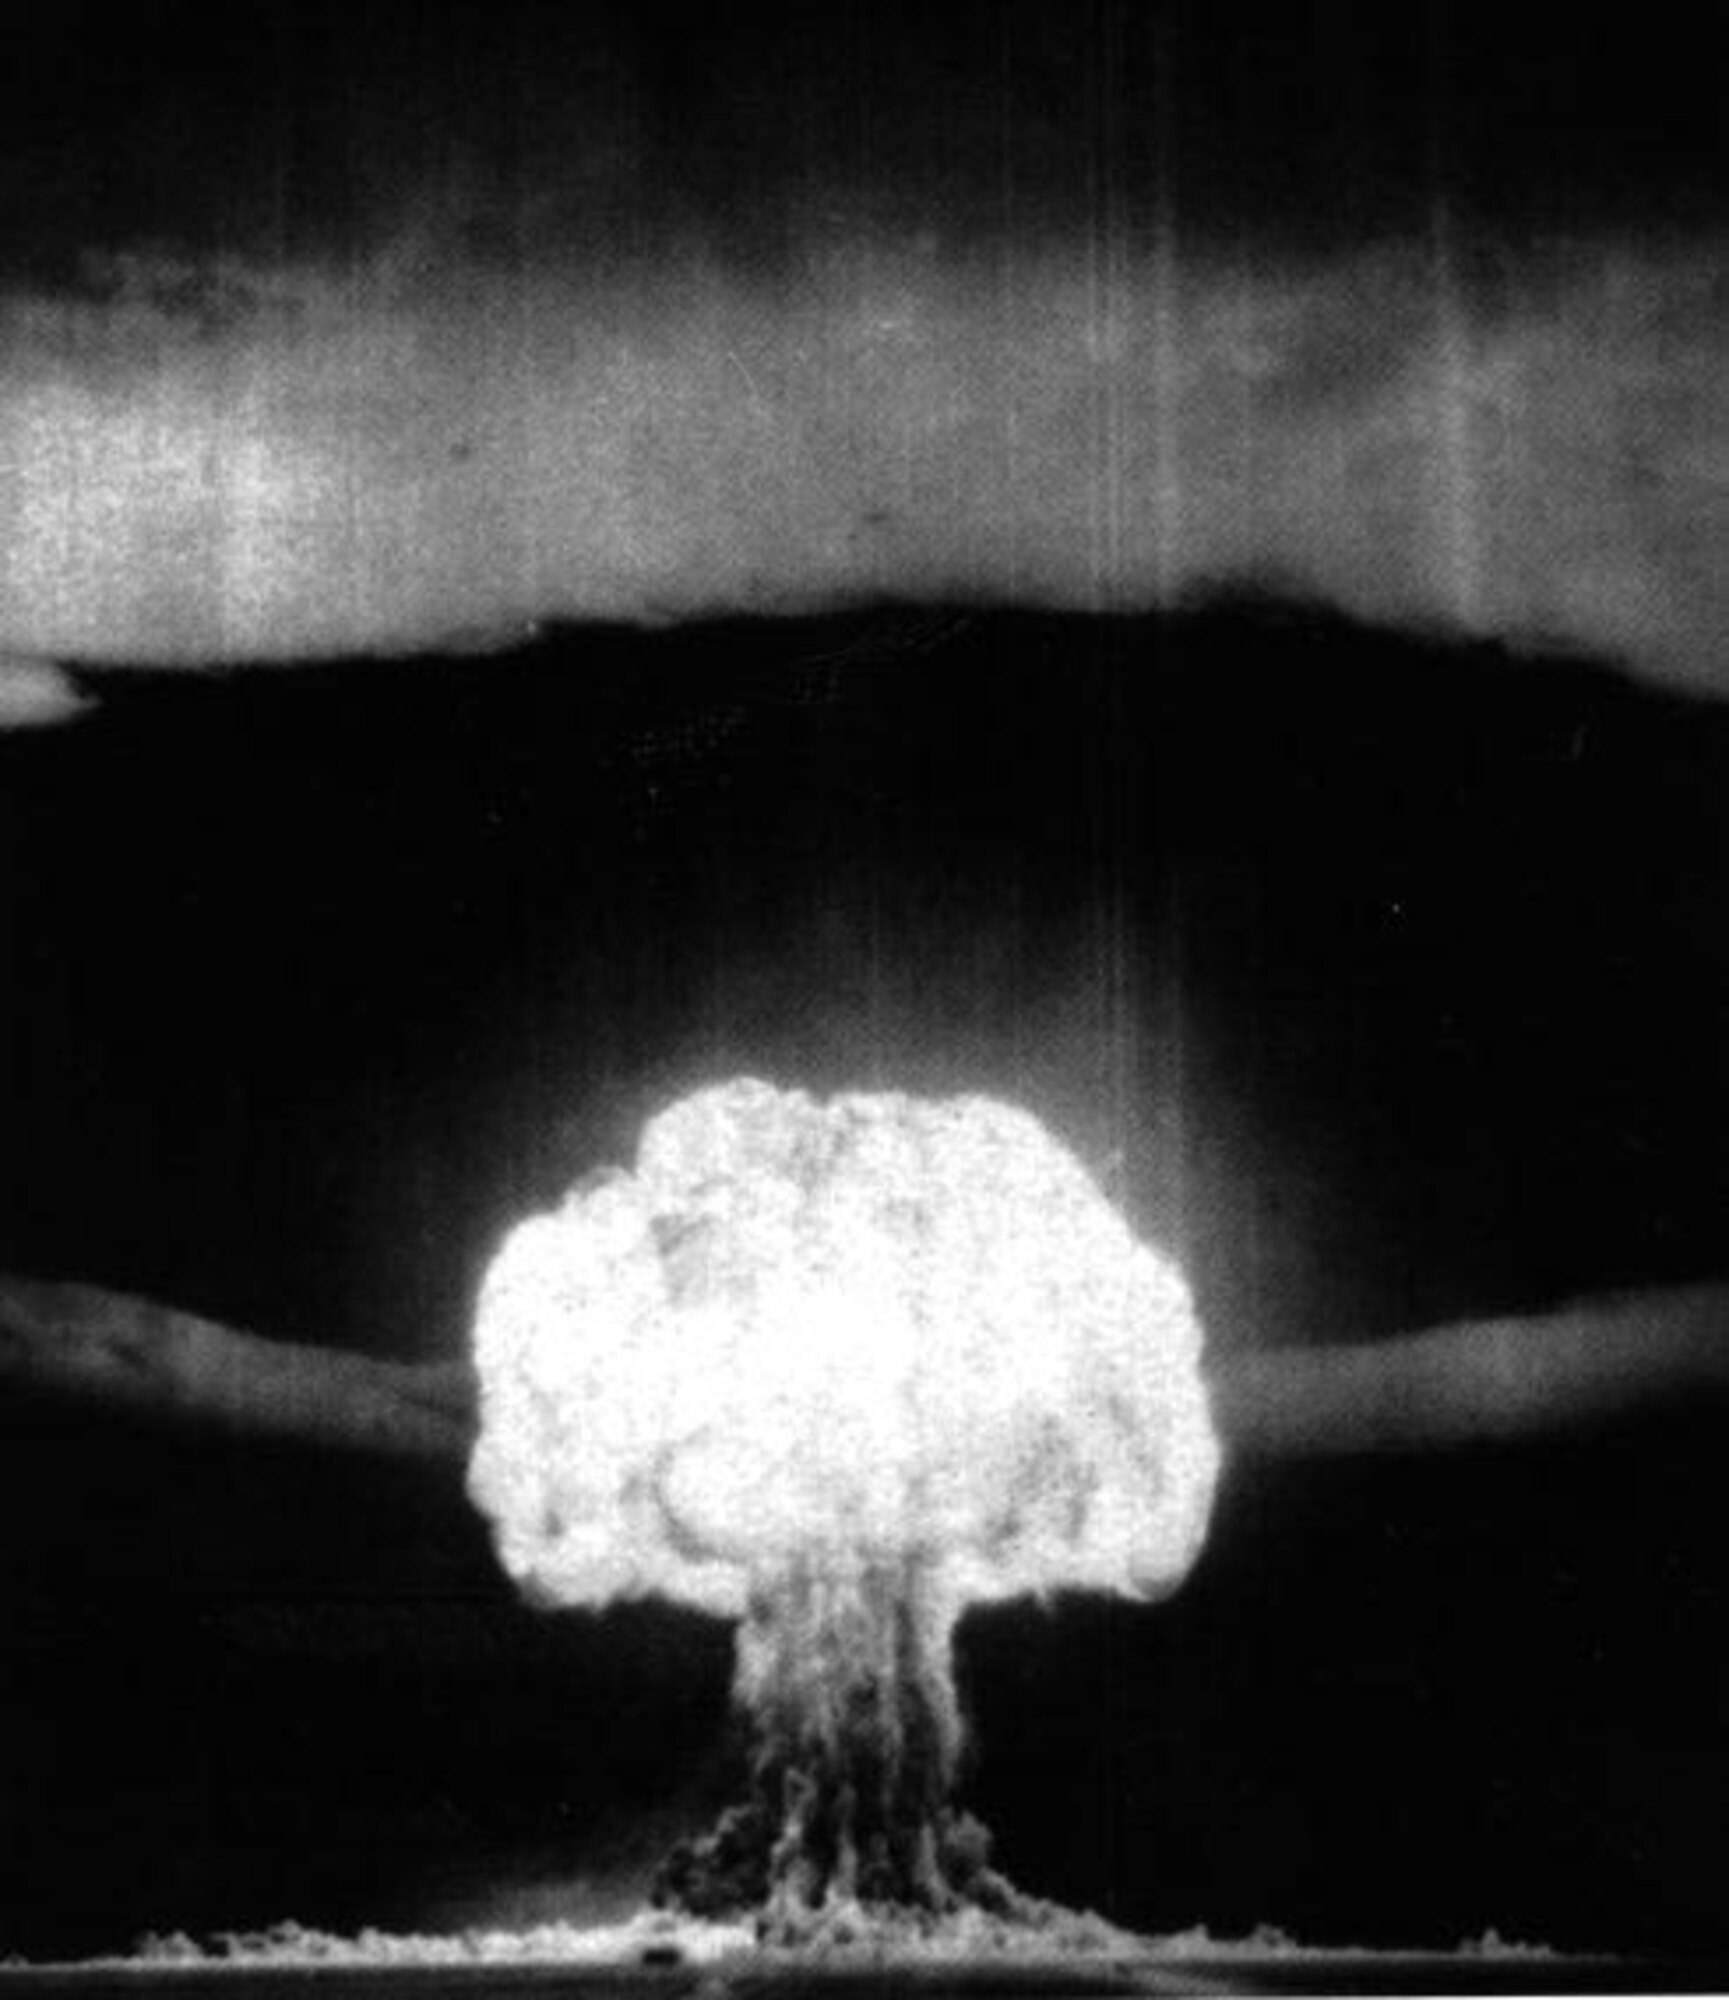 The Soviet Union detonates a 400 kiloton  thermonuclear weapon at the Semipalatinsk Test Site, Kazakhstan, in August 1953.  Dubbed  Joe-4 by the west, the bomb was significant because it was a deliverable thermonuclear device — a milestone the U.S. would not reach until May 1956.  (Photo courtesy of the Nuclear Weapons Archive)